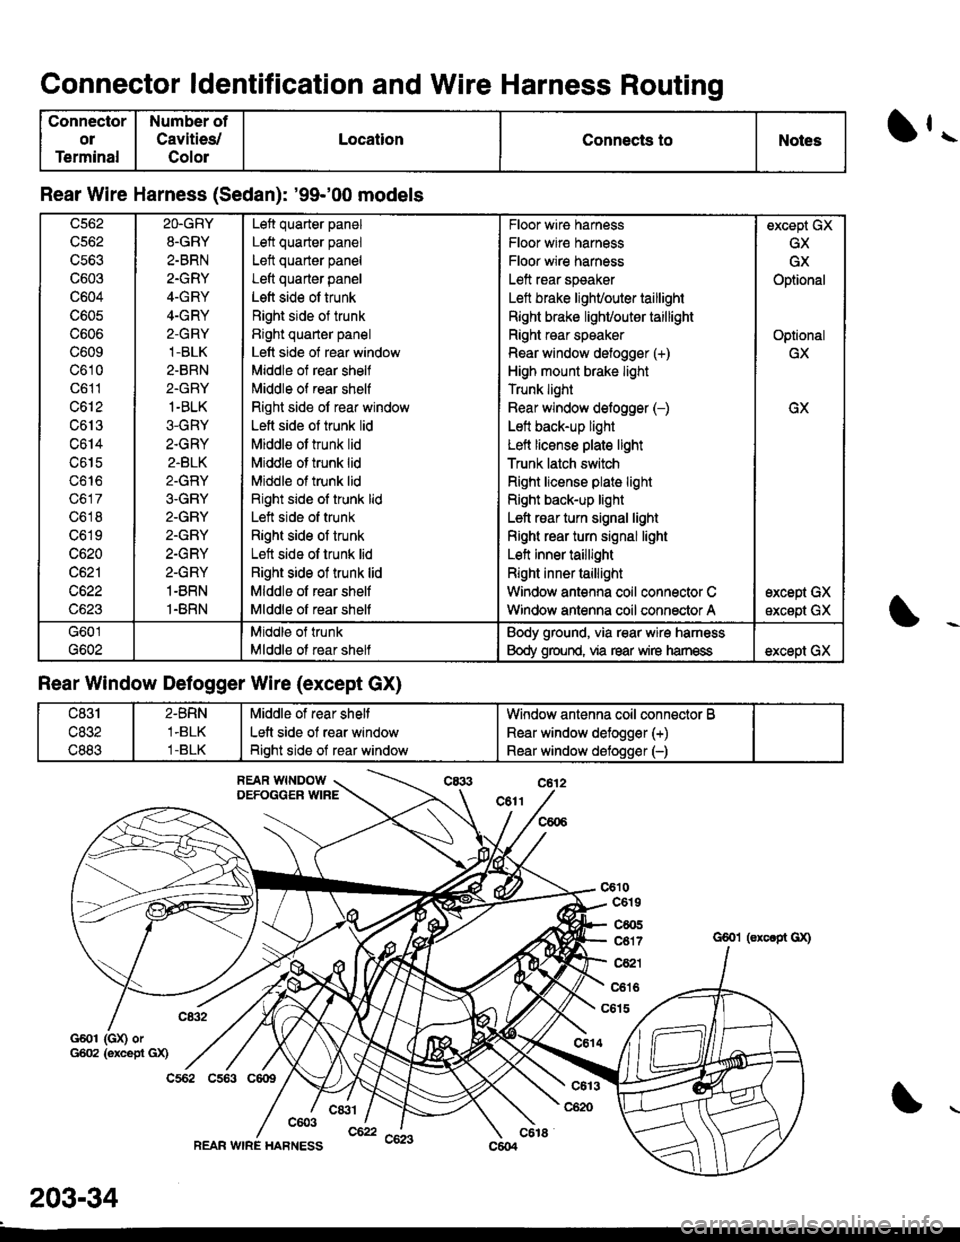 HONDA CIVIC 1996 6.G Service Manual Connector ldentification and Wire Harness Routinq
Connector
ol
Terminal
Number of
Cavities/
Color
LocationConnects toNotesll..
Rear Wire Harness (Sedan): 99-00 models
G601 (GX) orG602 (excepi GX)
c6